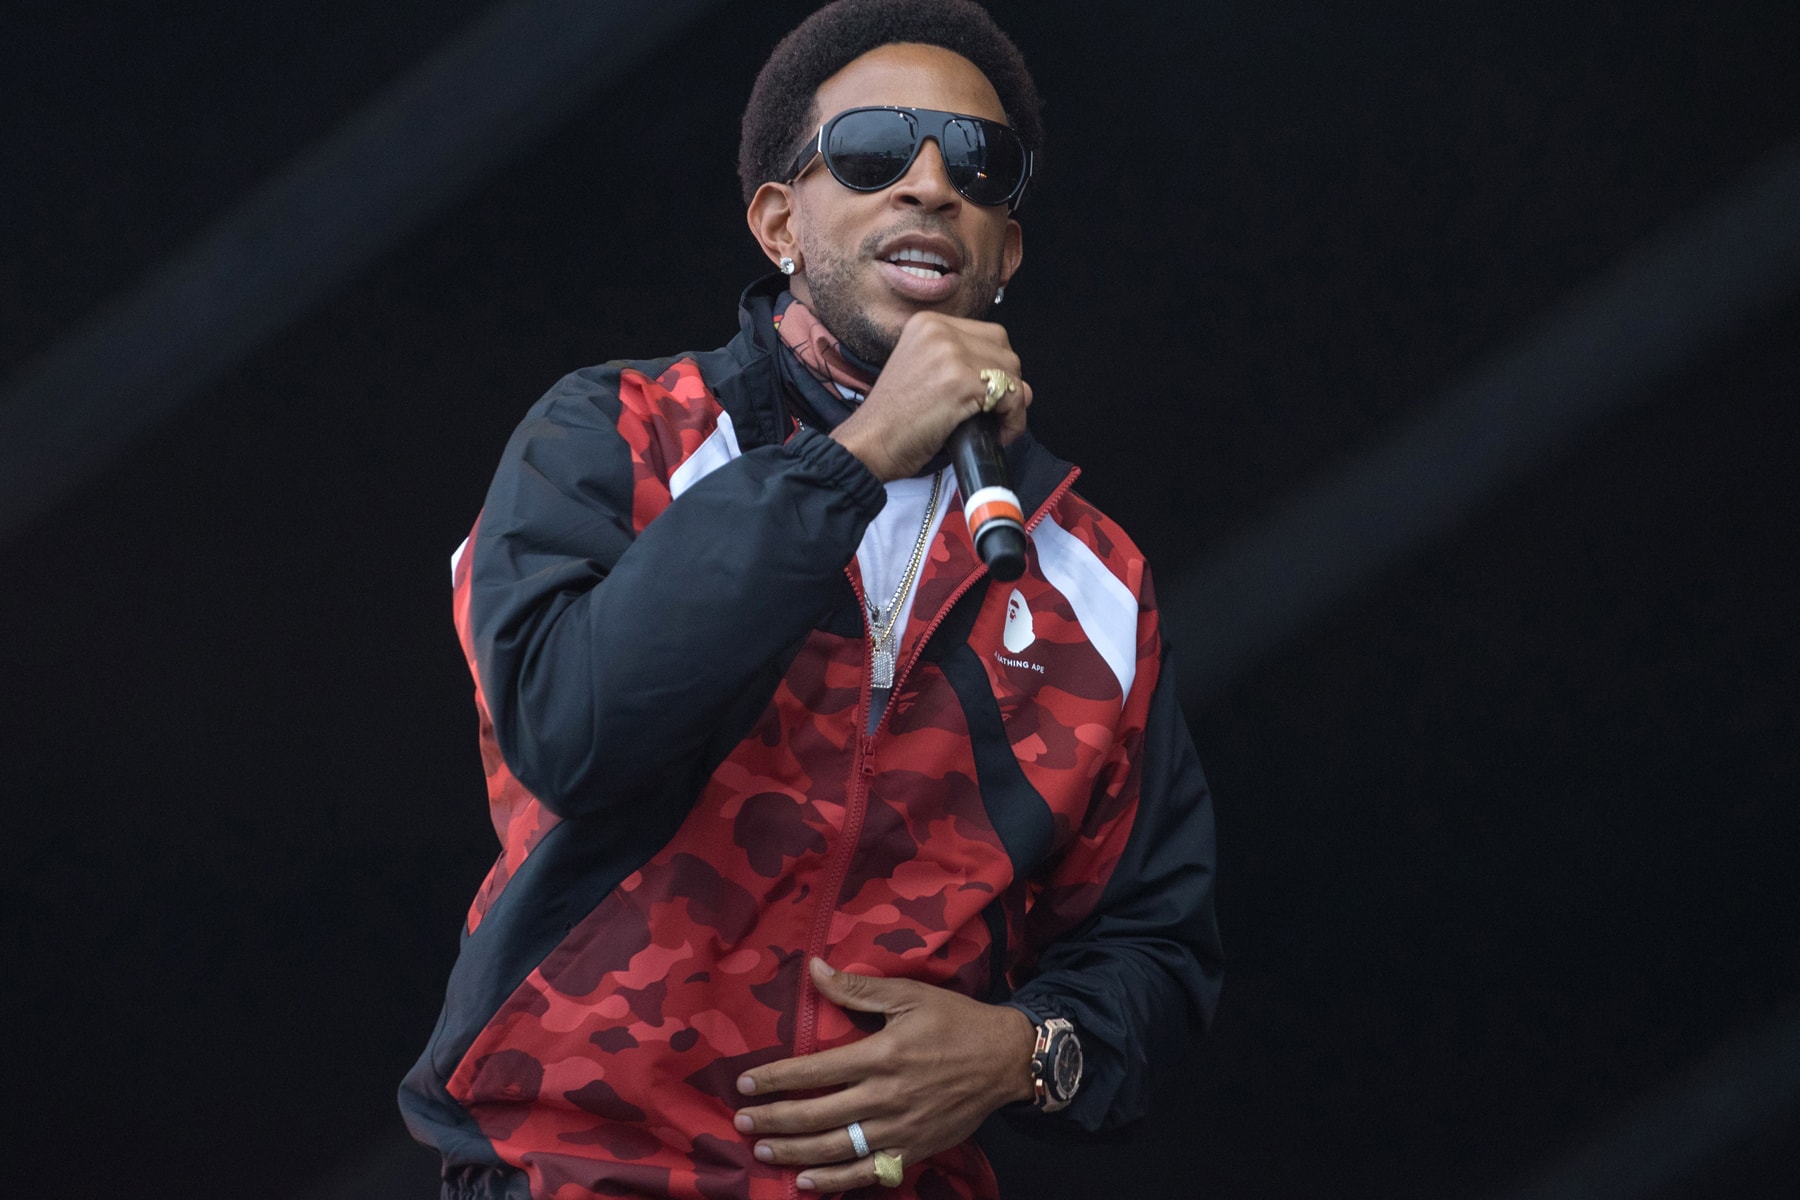 Ludacris Debuts New Songs During 'Verzuz' nelly Battle silence of the lambs lil wayne timbaland 